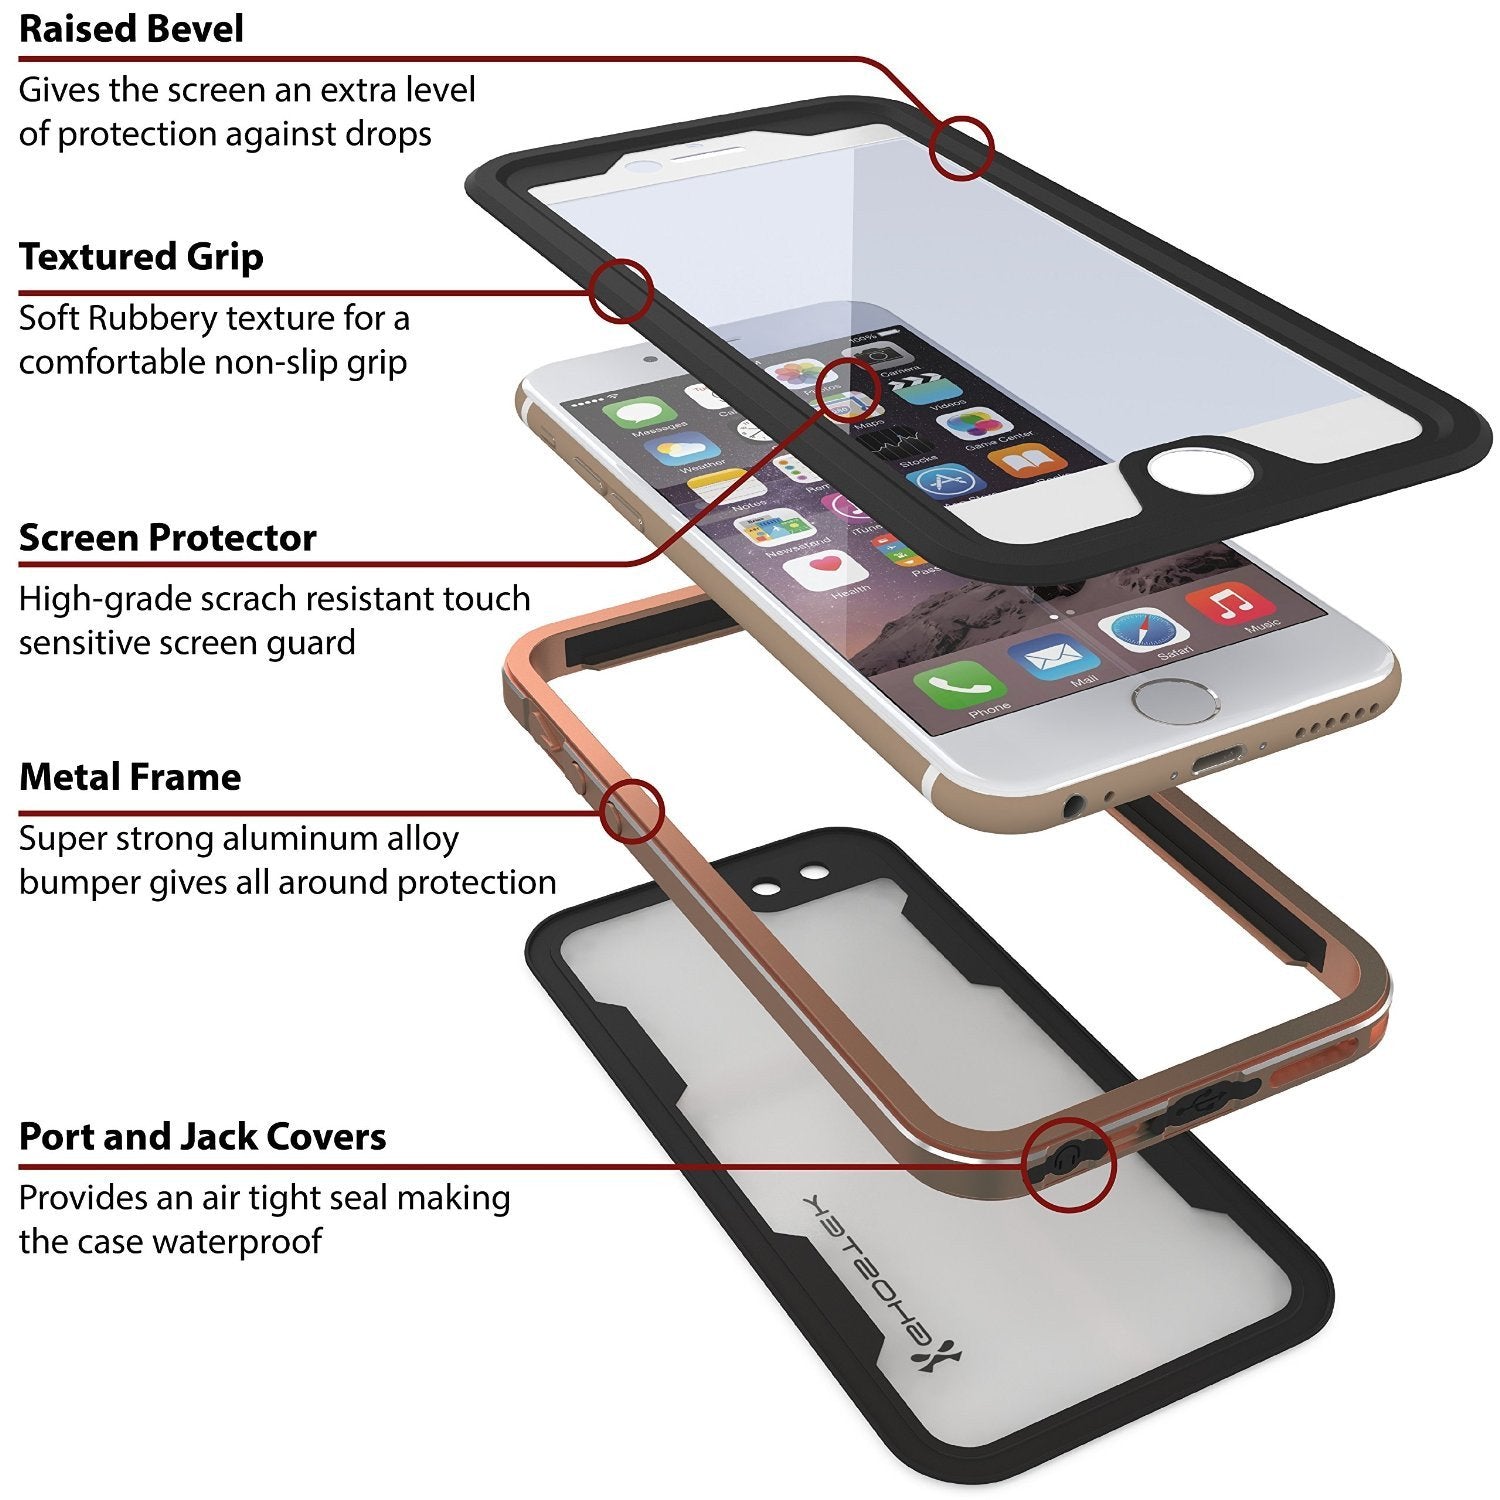 iPhone 6S+/6+ Plus Waterproof Case Ghostek Atomic 2.0 Gold w/ Attached Screen Protector | Slim - PunkCase NZ